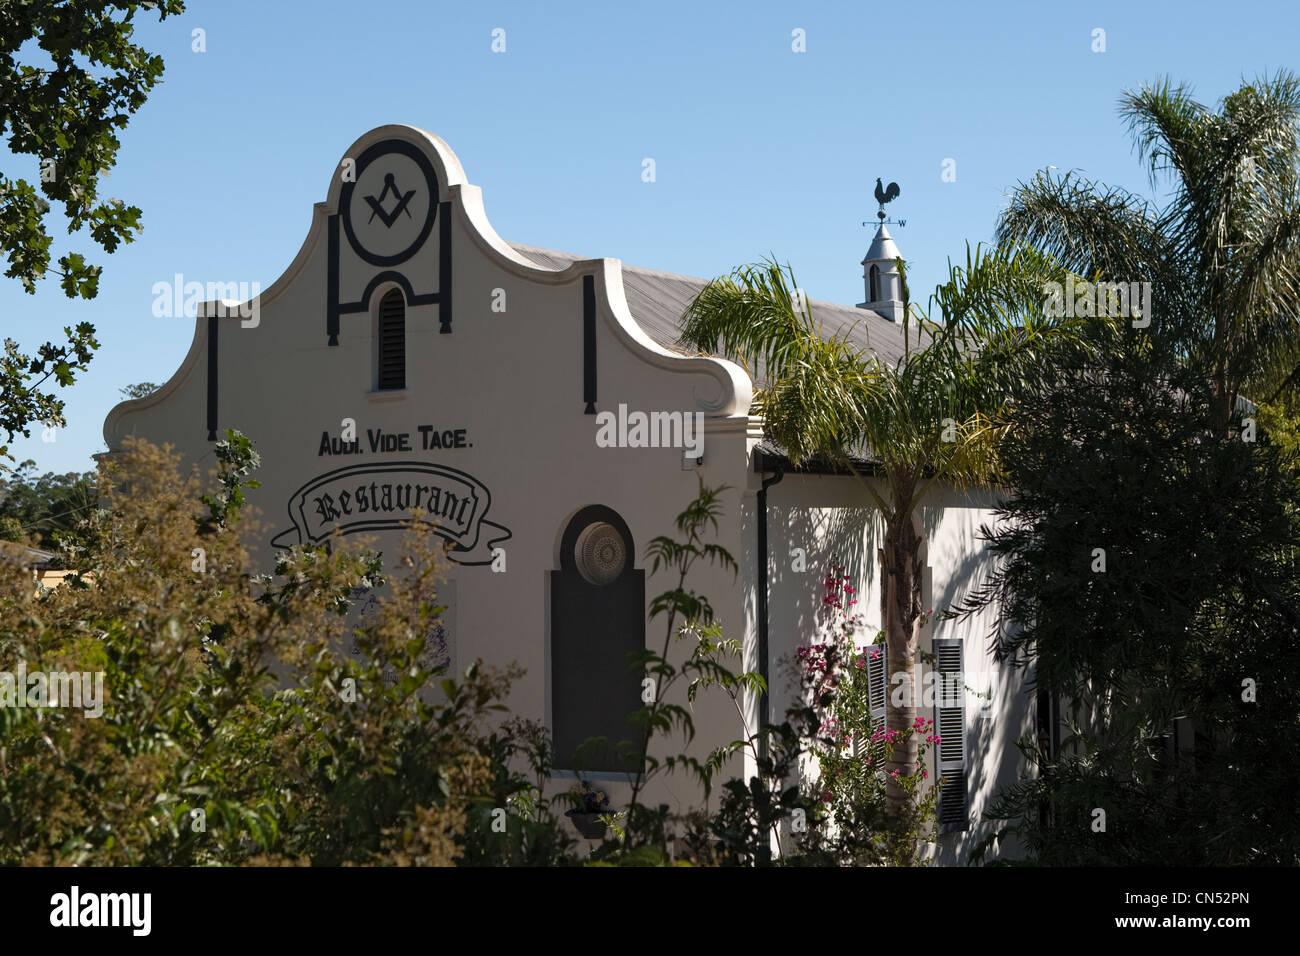 Old masonic hall, "Audi, Vide, Tace", Swellendam, Garden Route South Africa Stock Photo